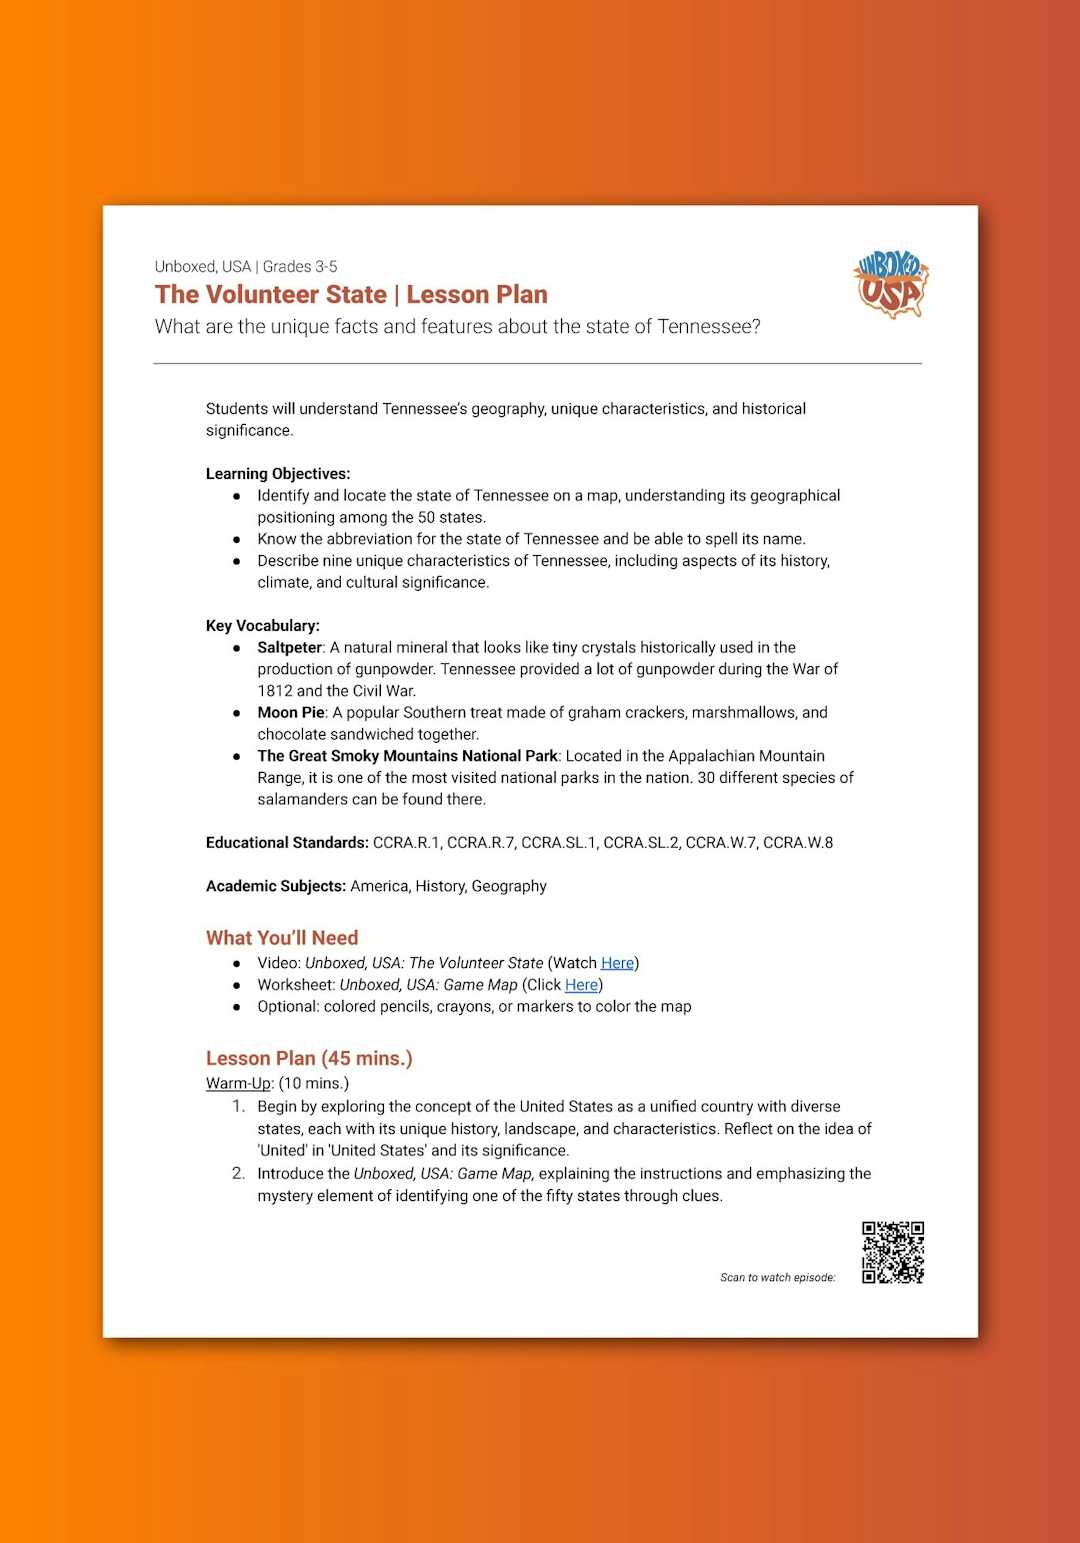 "Unboxed, USA: The Volunteer State" Lesson Plan